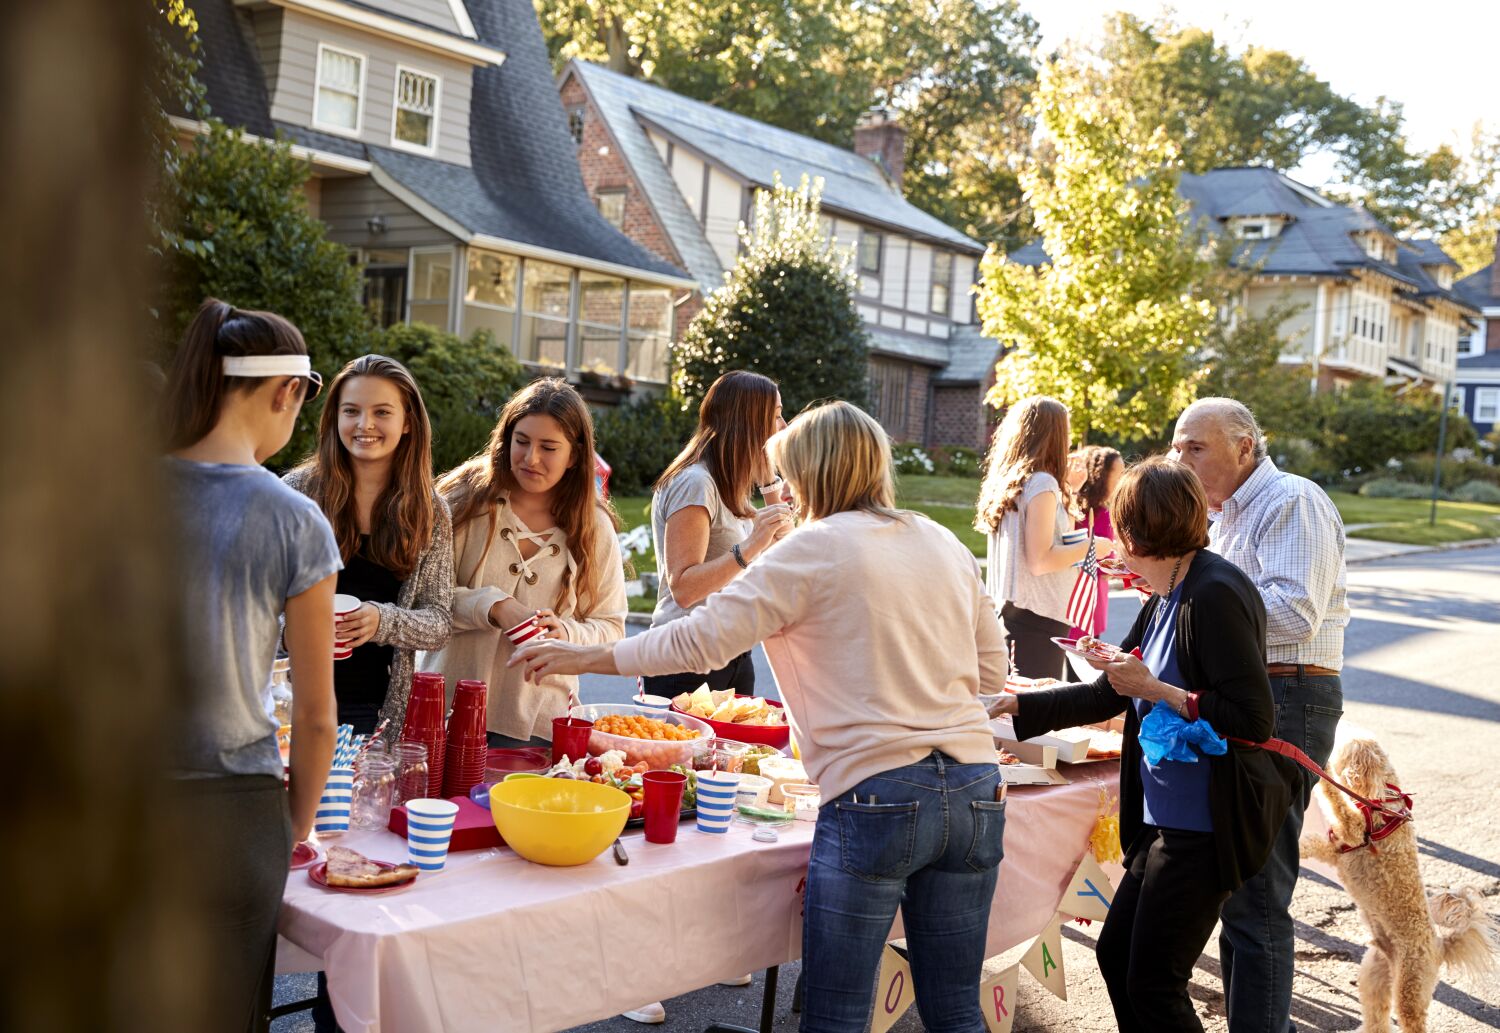 Wanna throw a block party in L.A. County this summer? Start here